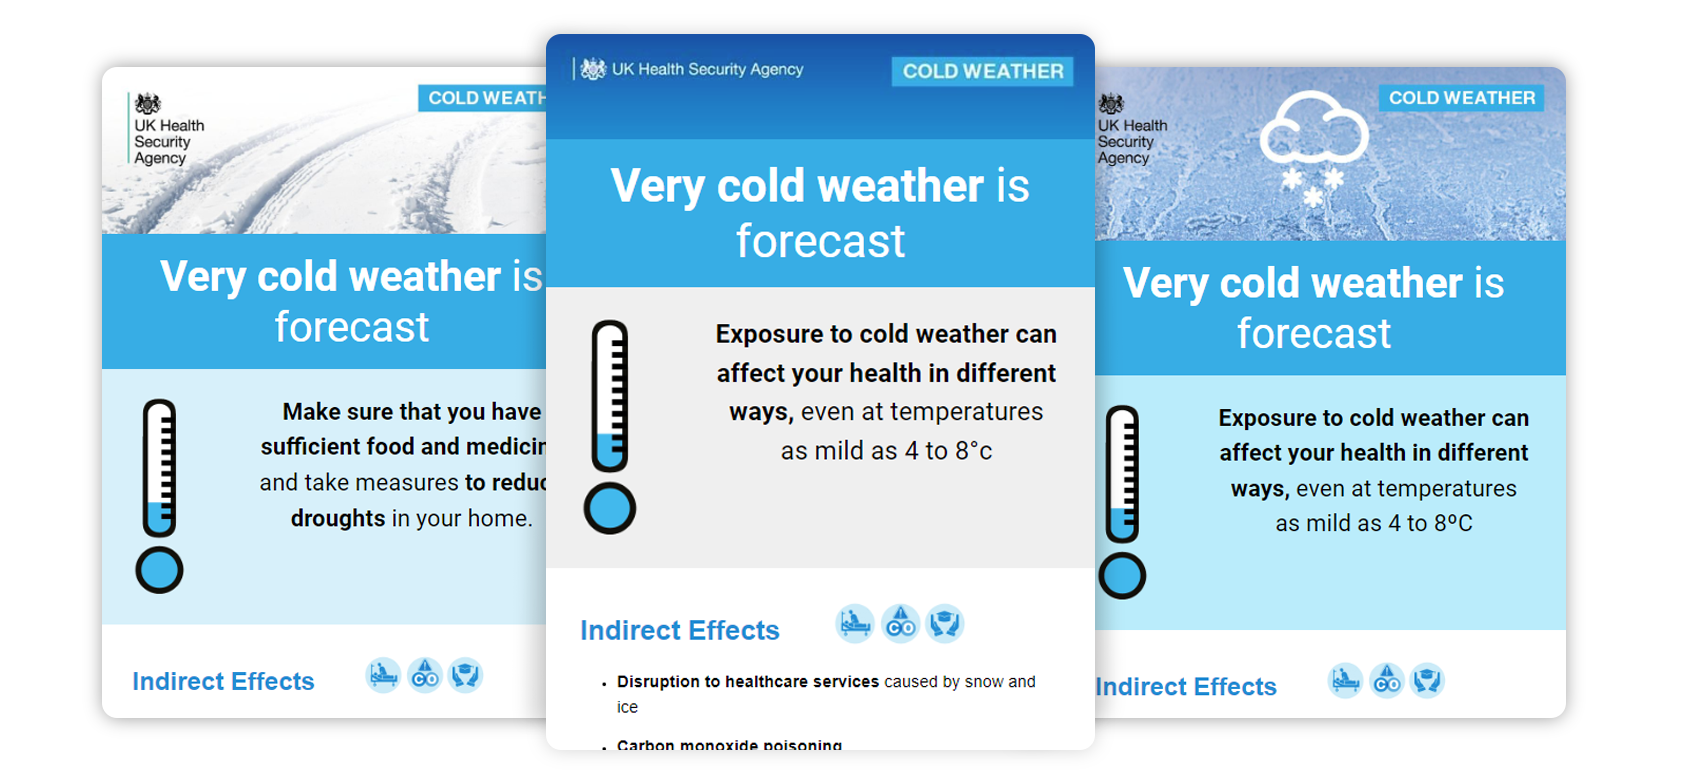 Email Library Campaign: UK Health Security Agency - Cold Weather